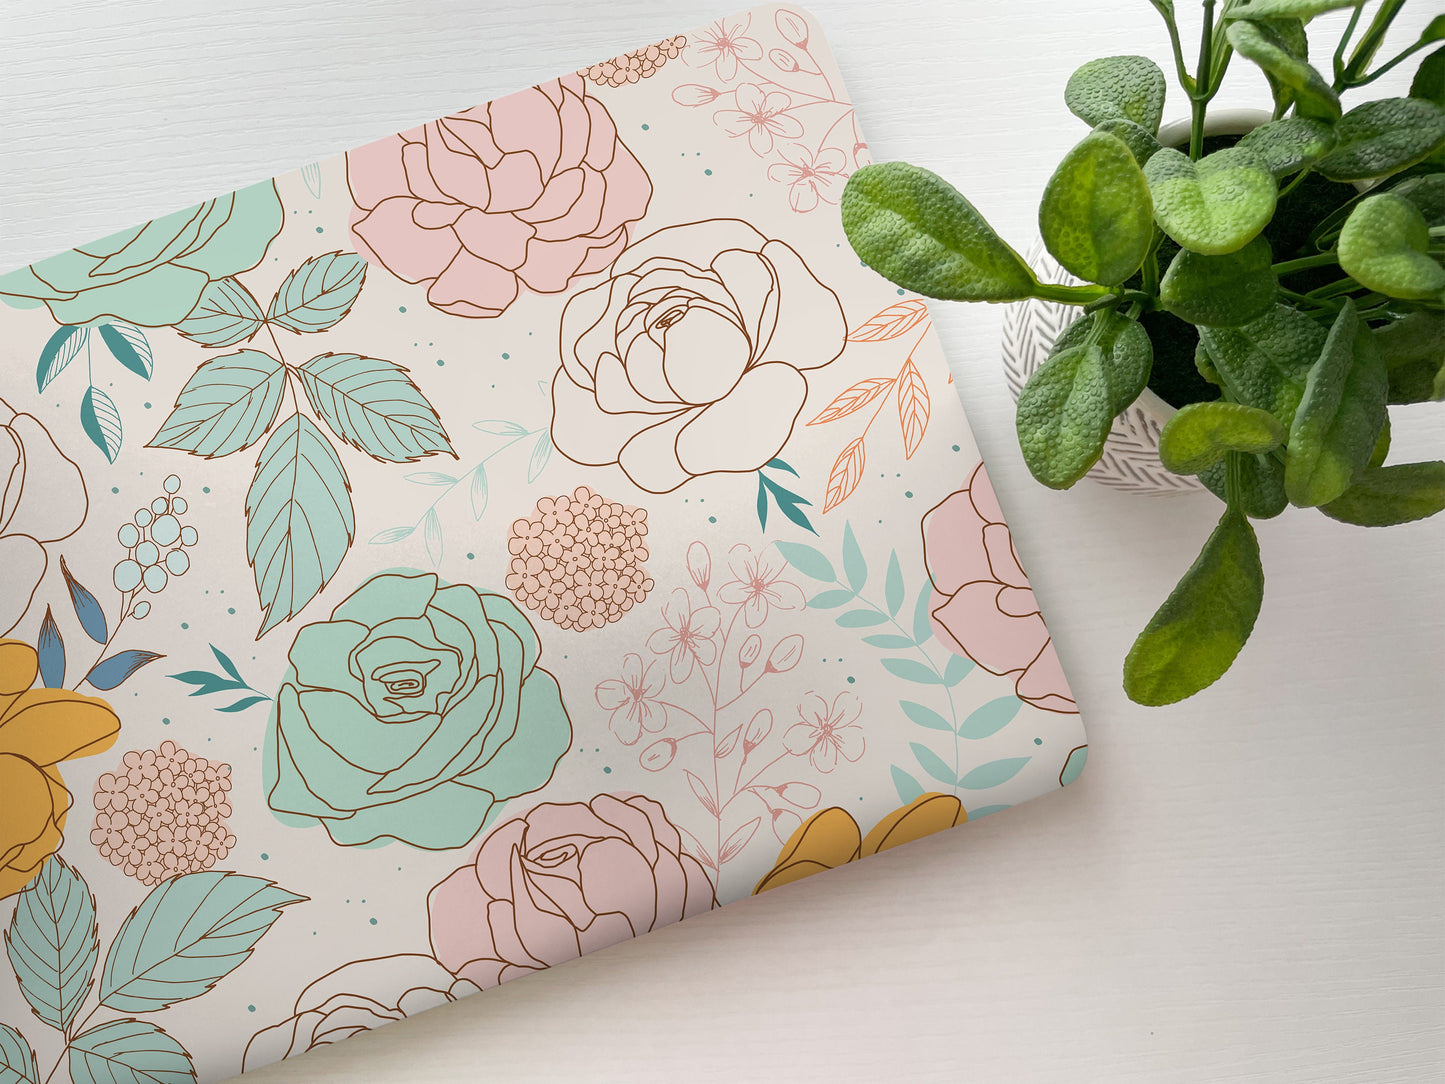 Mint Pink Floral Laptop Skin, Laptop Cover, Laptop Skins, Removable Laptop Skins, Laptop Decal, Customized Laptop Full Coverage Stickers, 23 - James & Inks